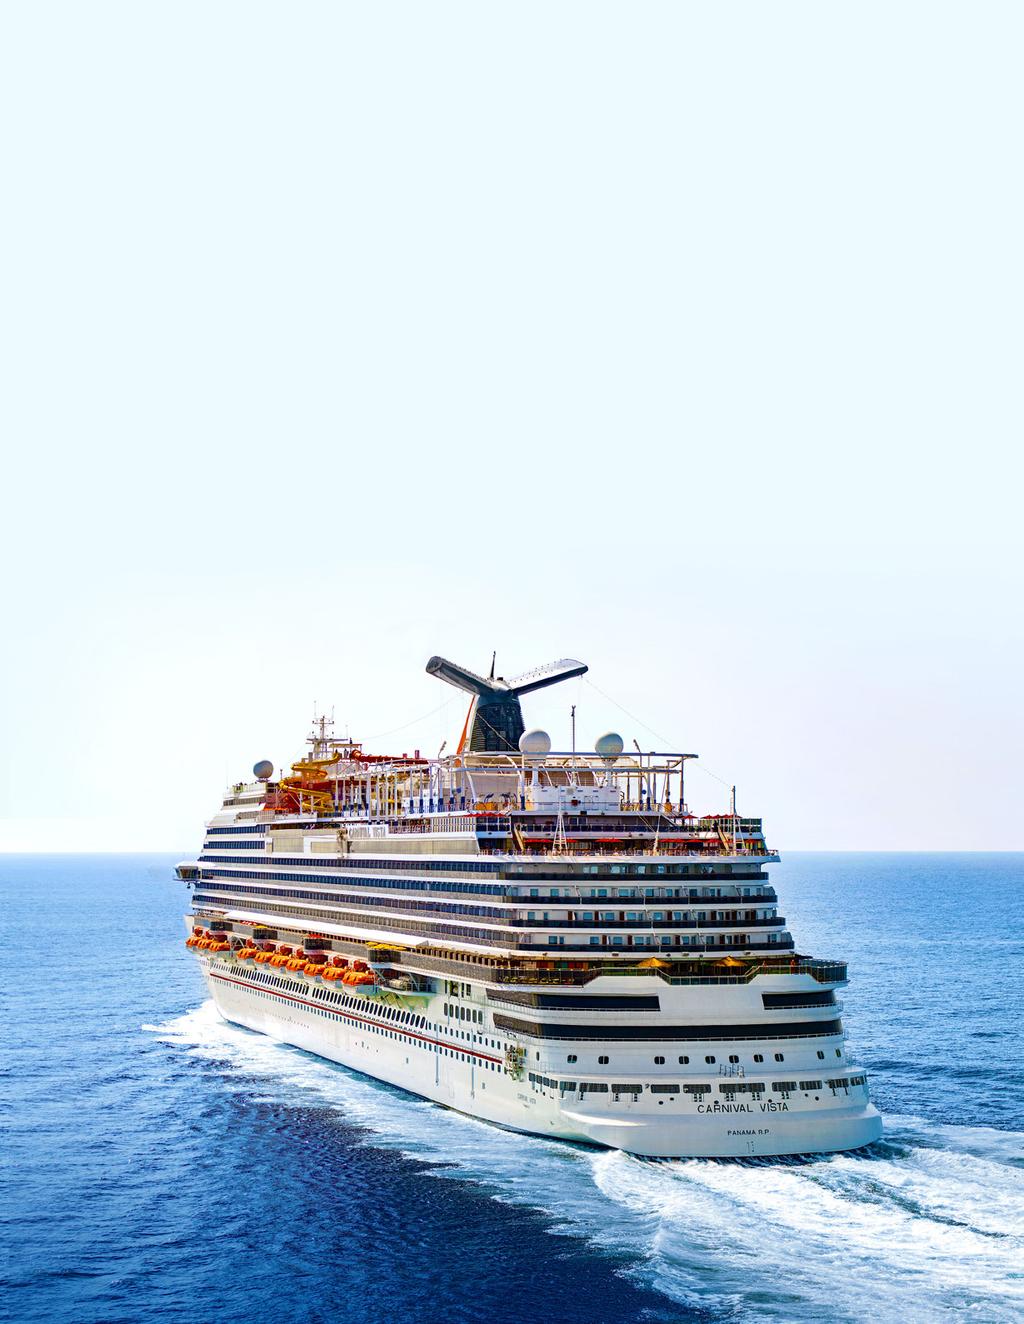 AWARD WINNING FLEET Reader s Digest Most Trusted Brands in America Most Trusted Cruise Line in America 4th Consecutive Year 2018 Cruise Critic Cruisers Choice Awards Best Shore Excursions Carnival